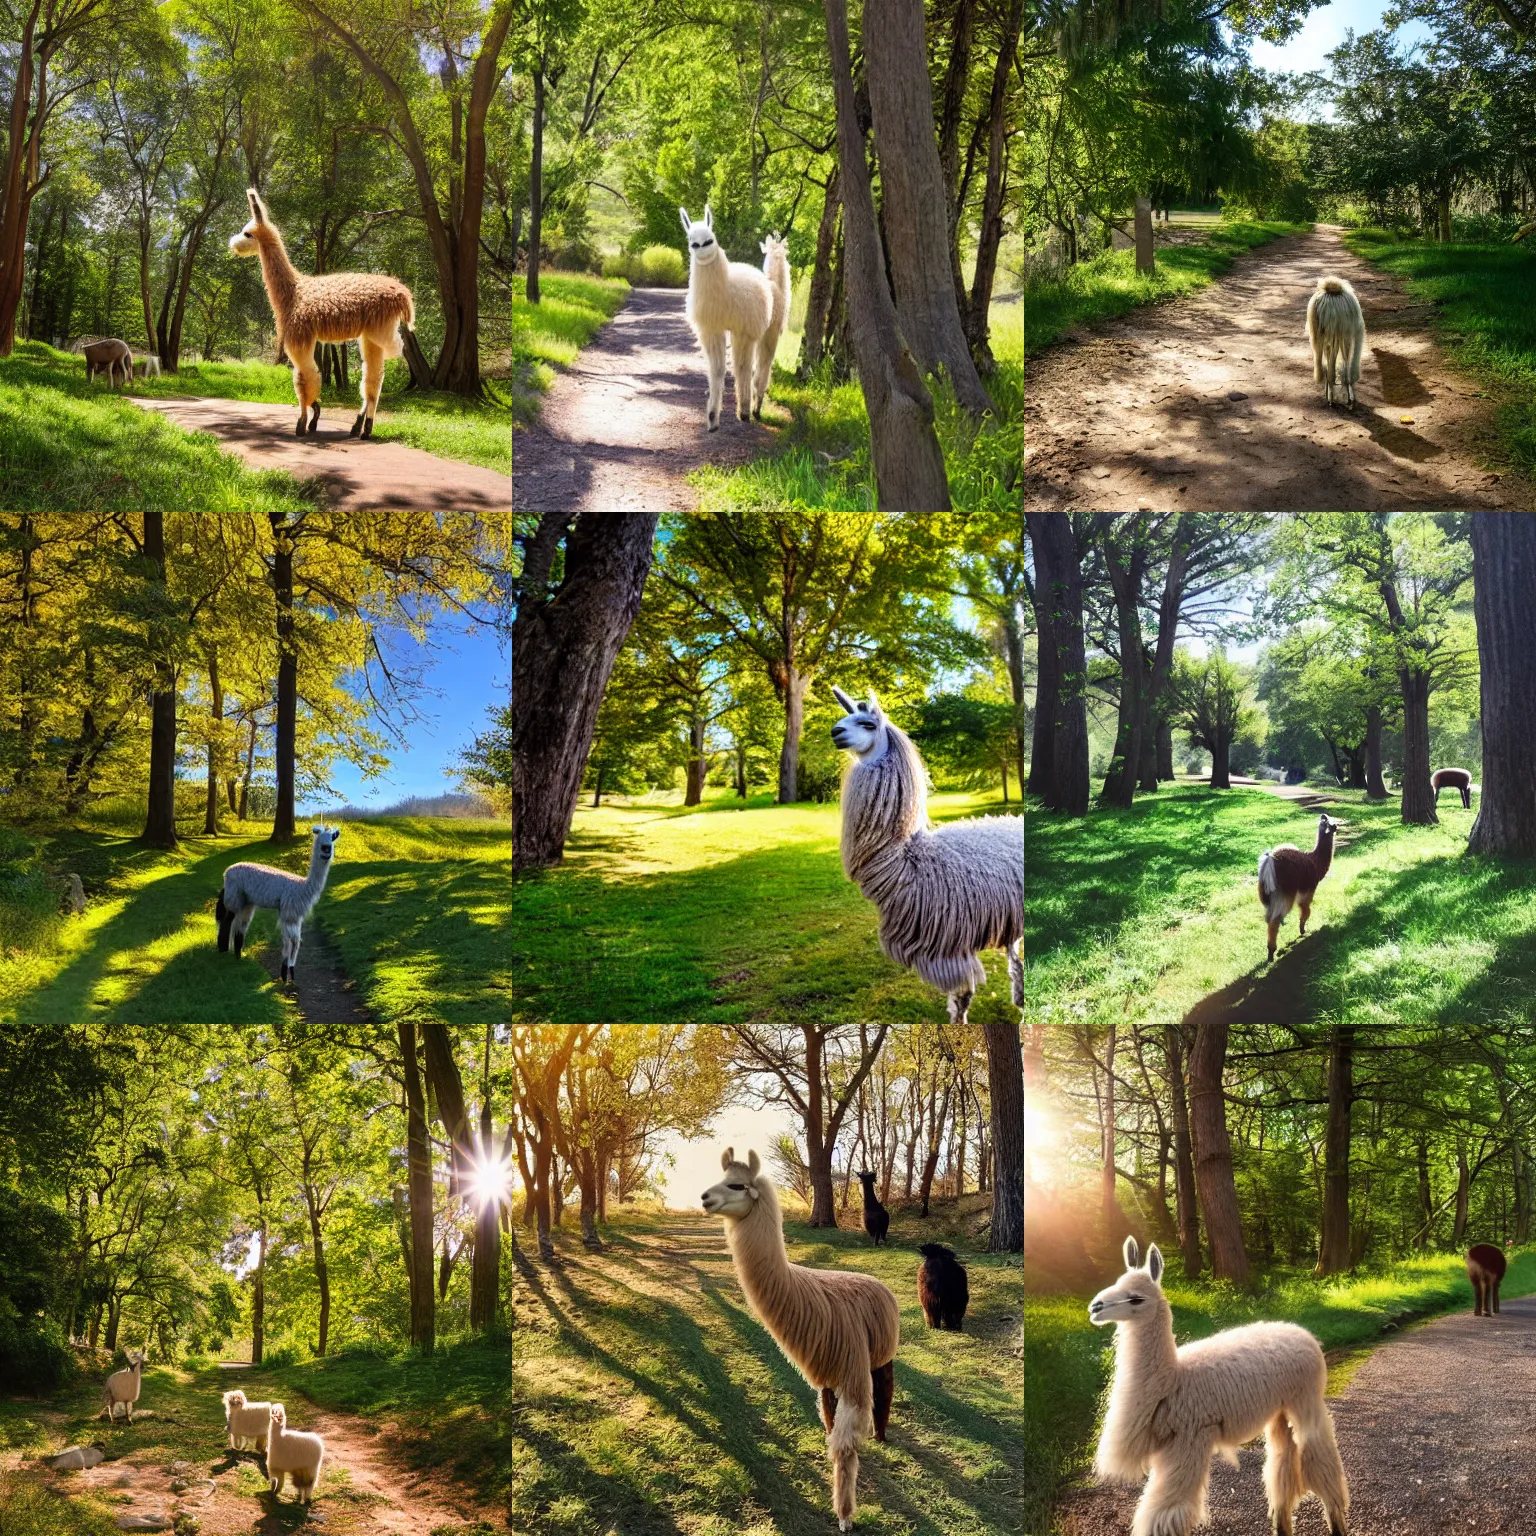 Prompt: the sunny path winds through the trees but suddenly a llama photobomb